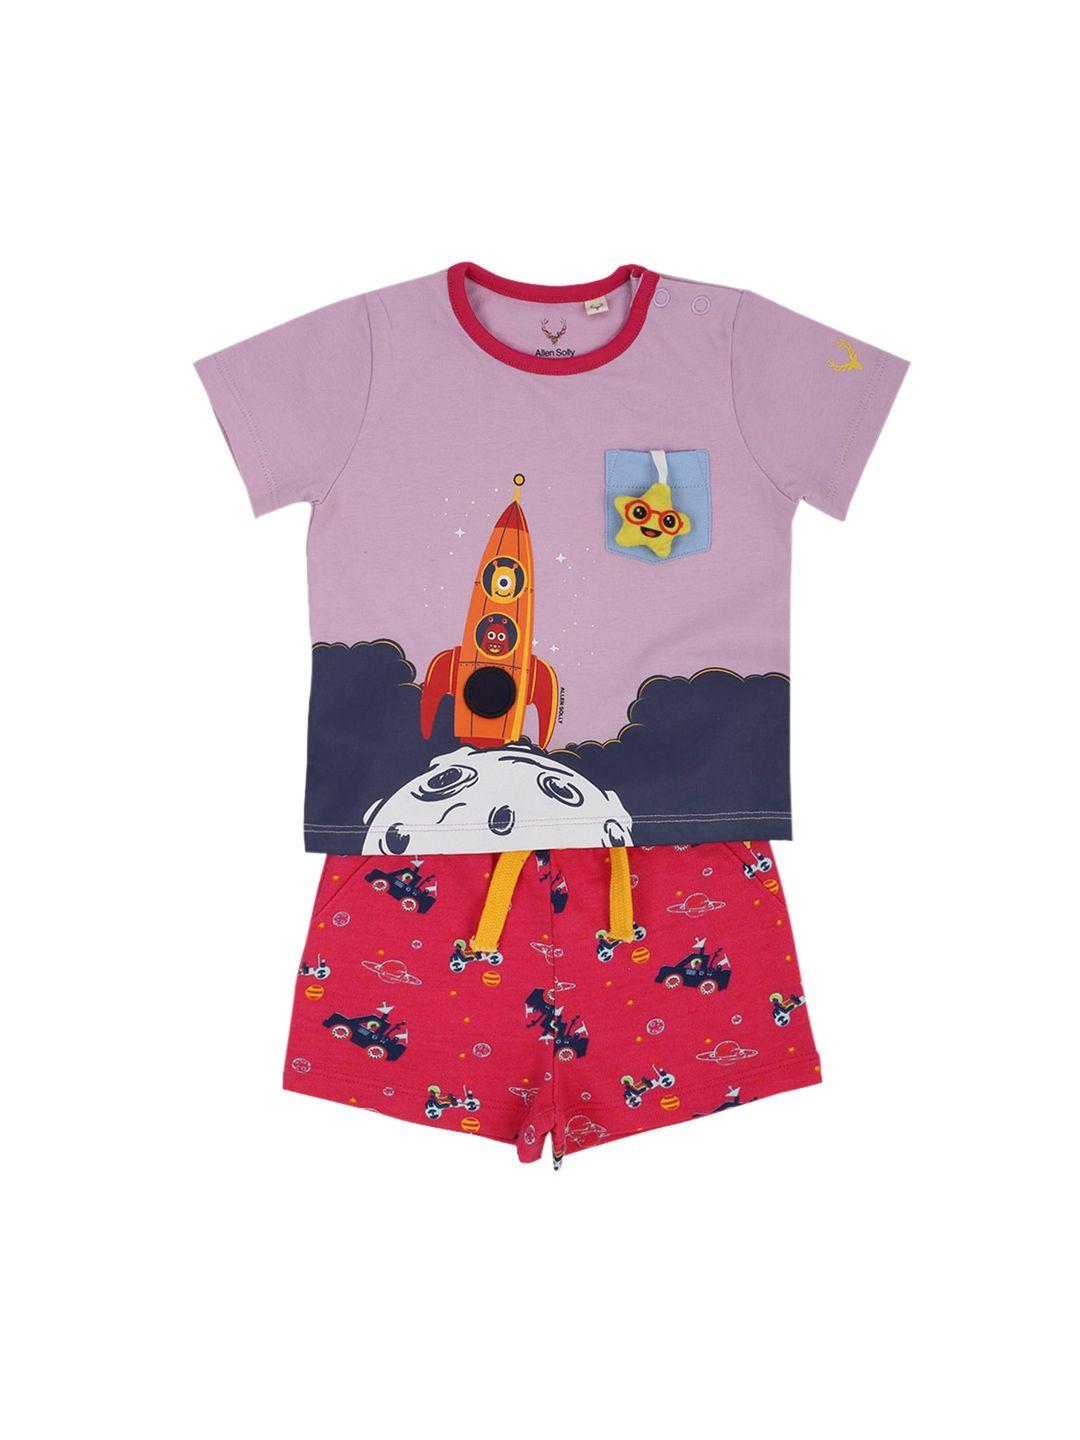 allen solly junior boys mauve & red printed cotton t-shirt with two shorts